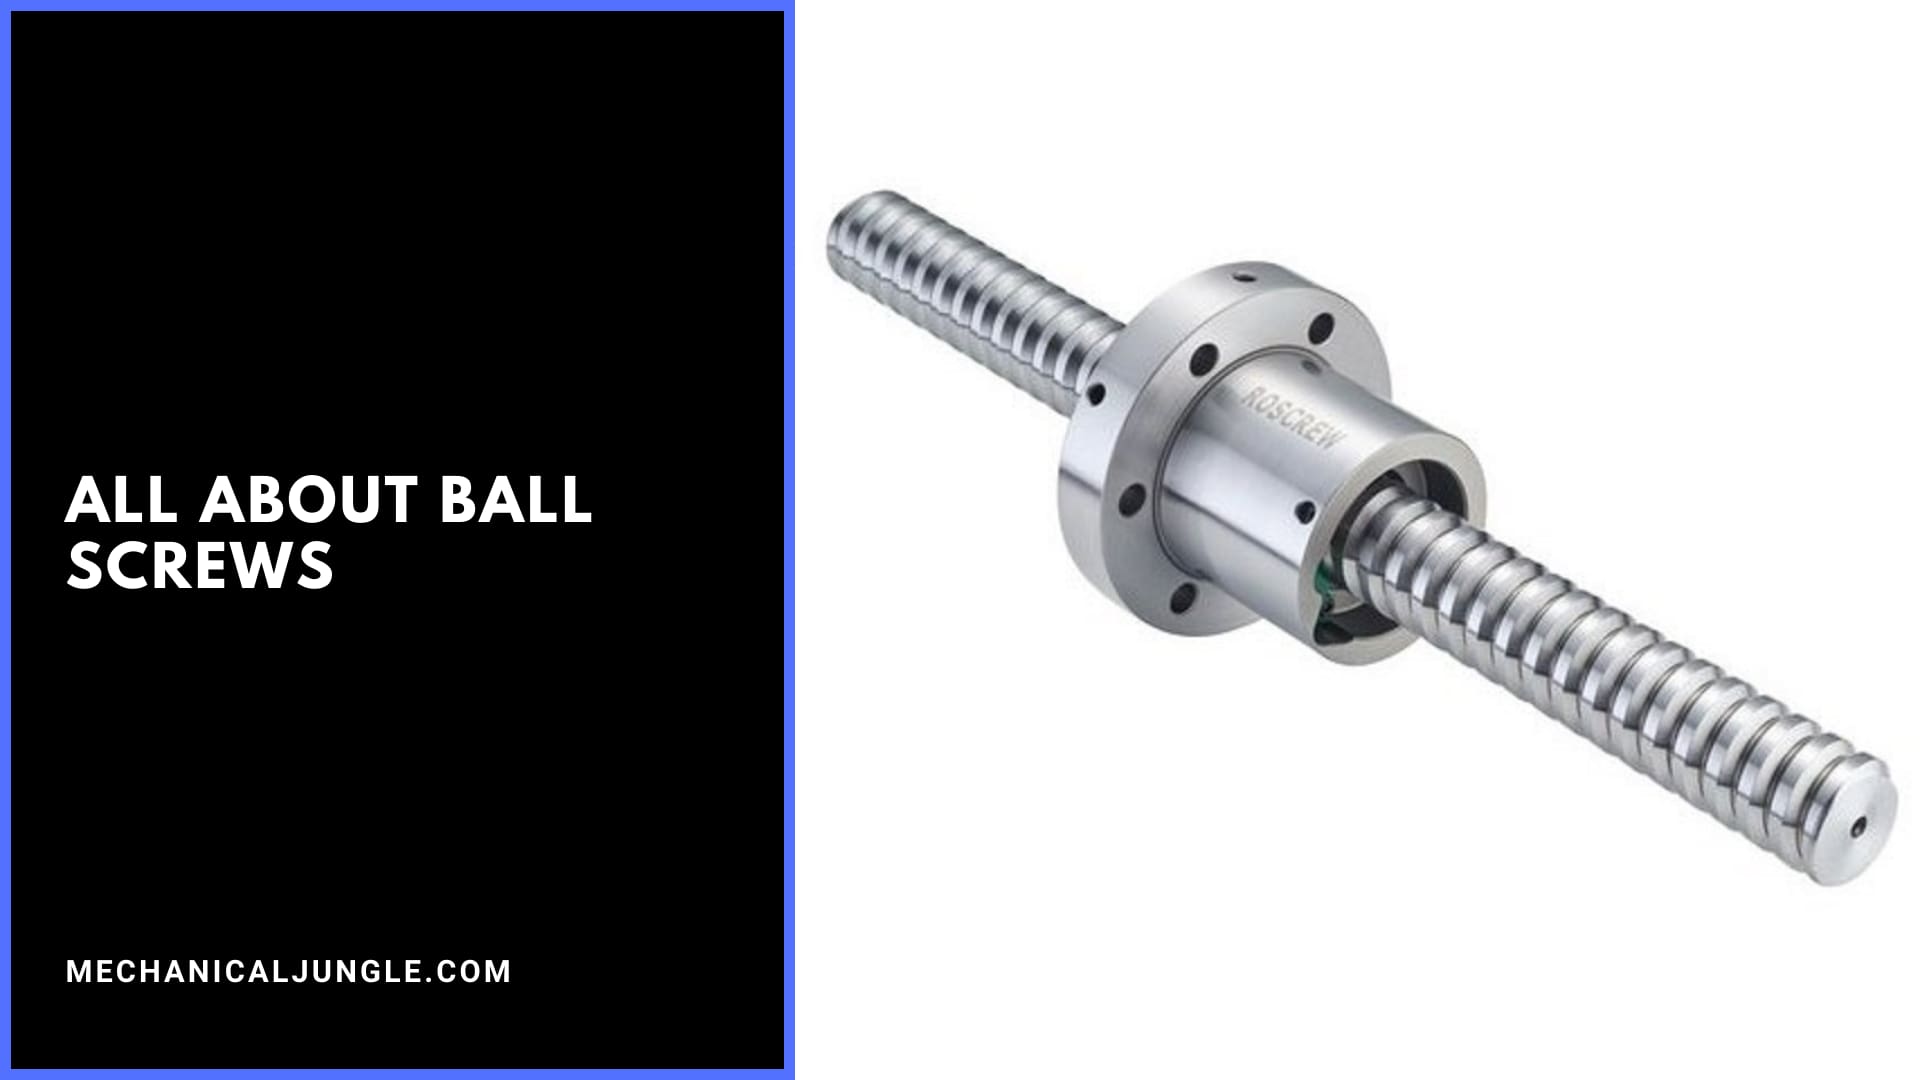 All About Ball Screws